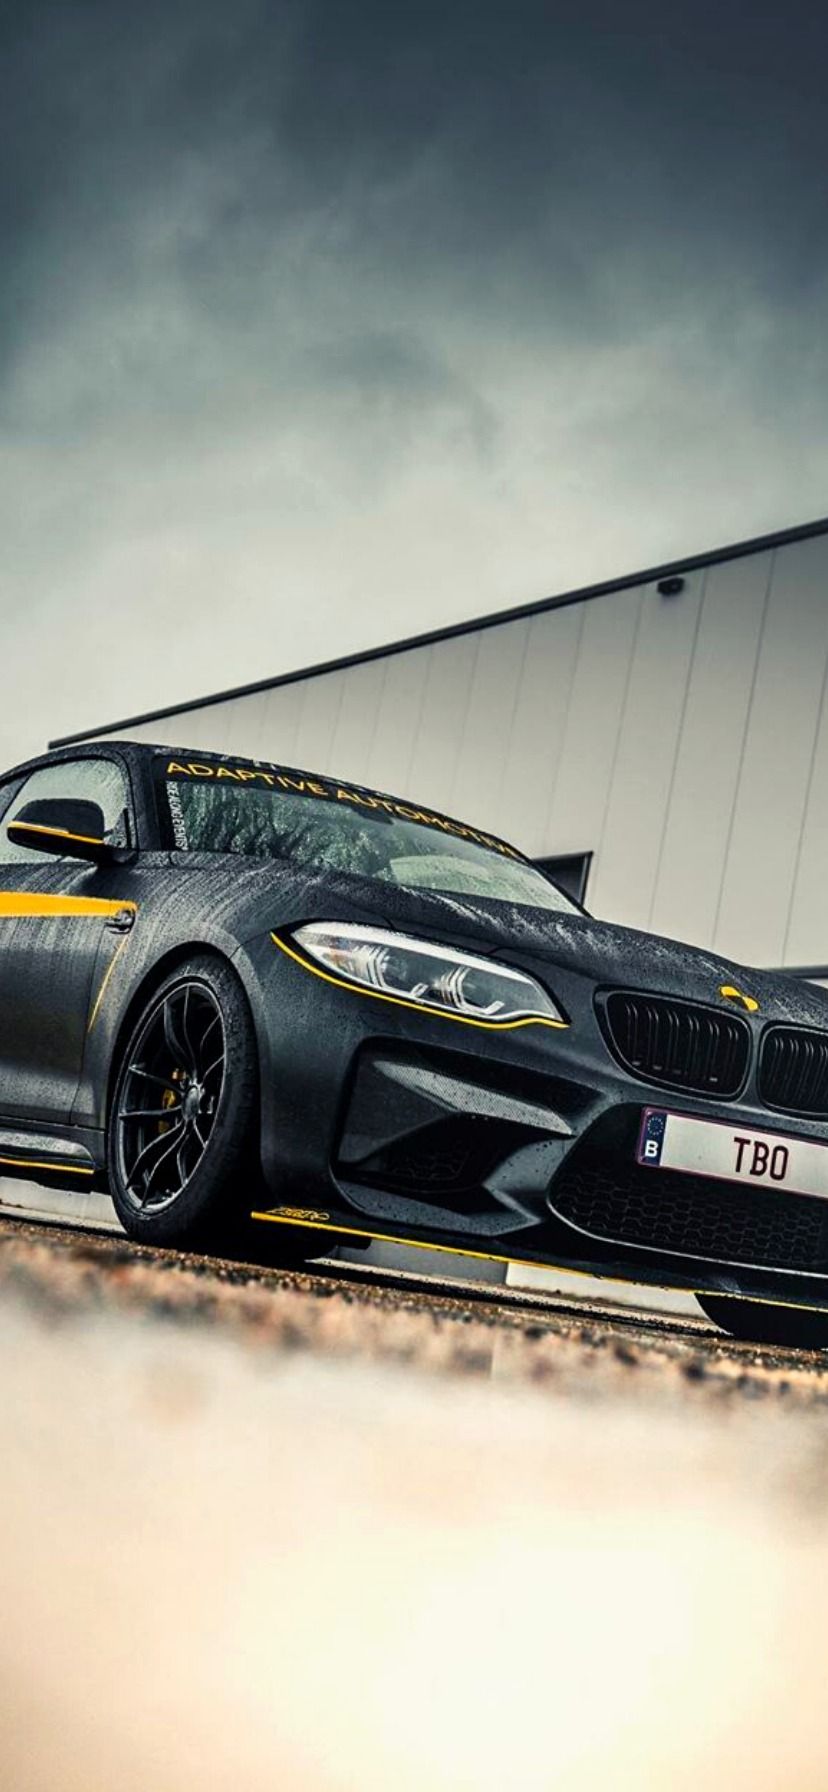 BMW M4 Wallpaper For iPhone Free Download